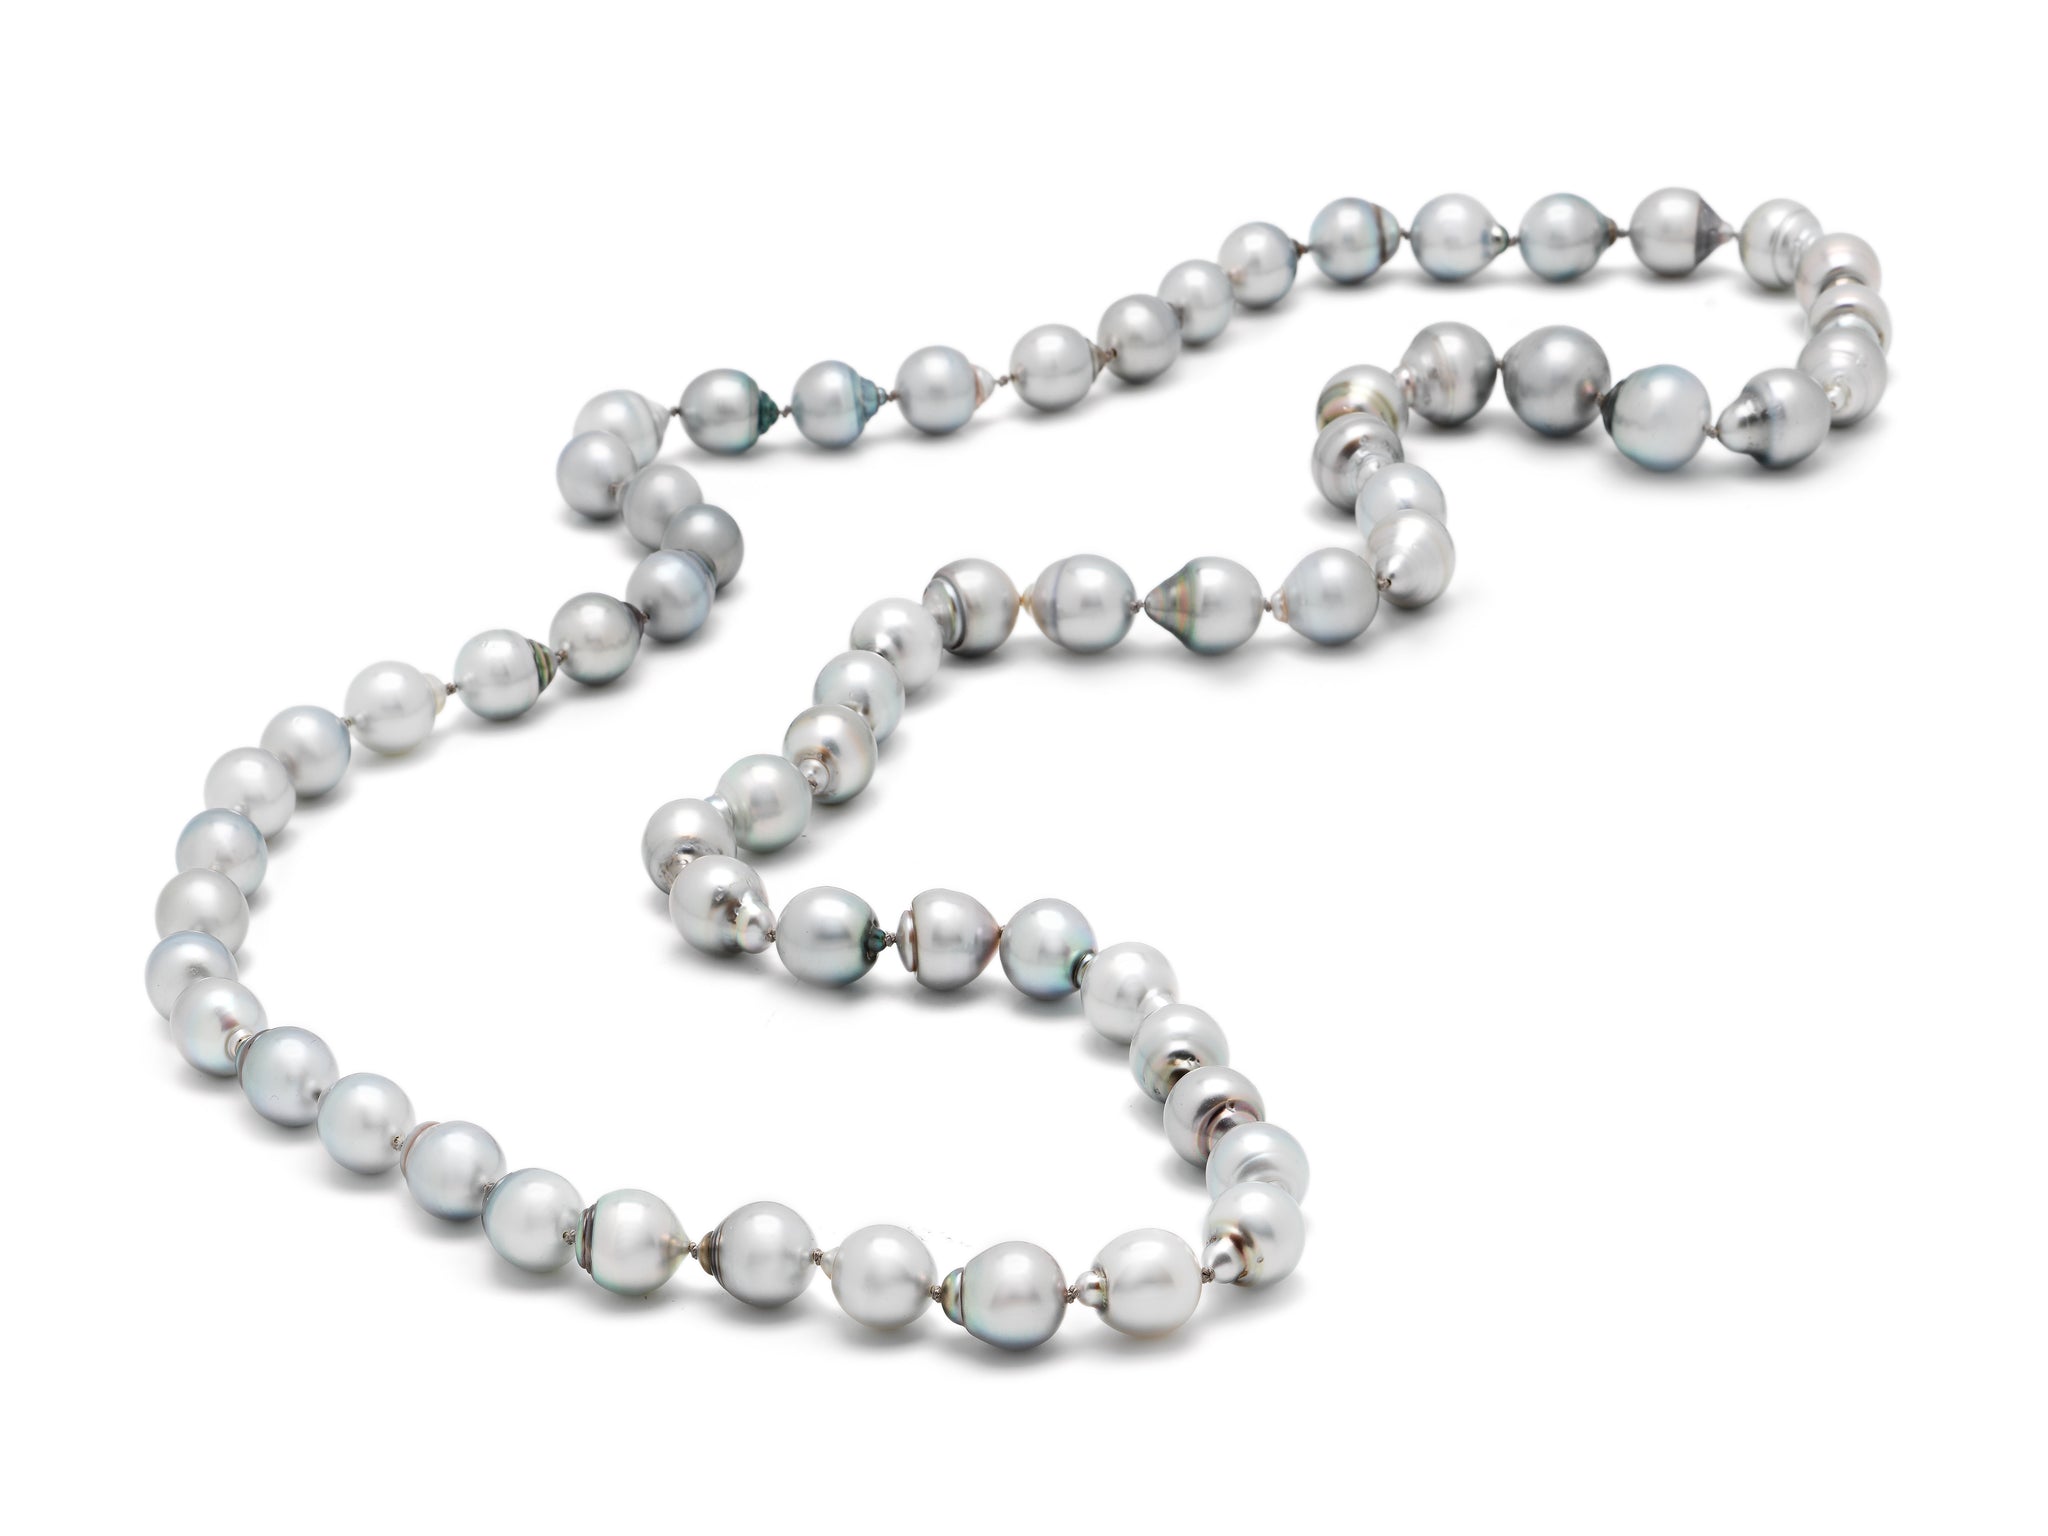 Necklace with 58 Tahitian pearls and lock